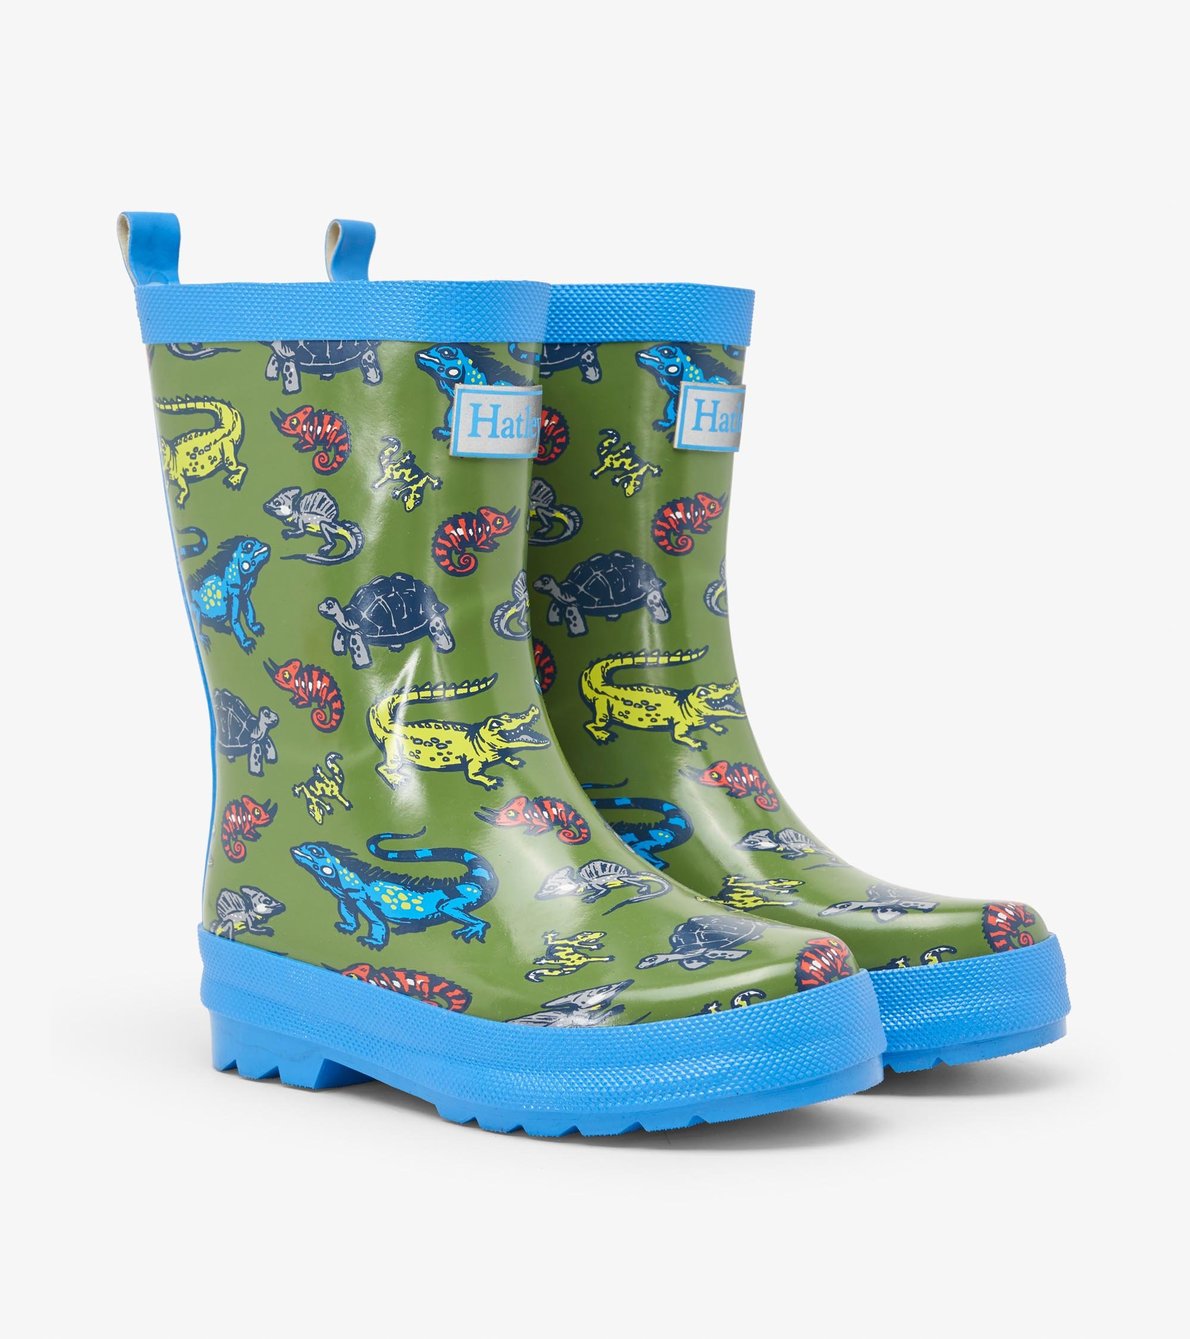 View larger image of Aquatic Reptiles Shiny Wellies